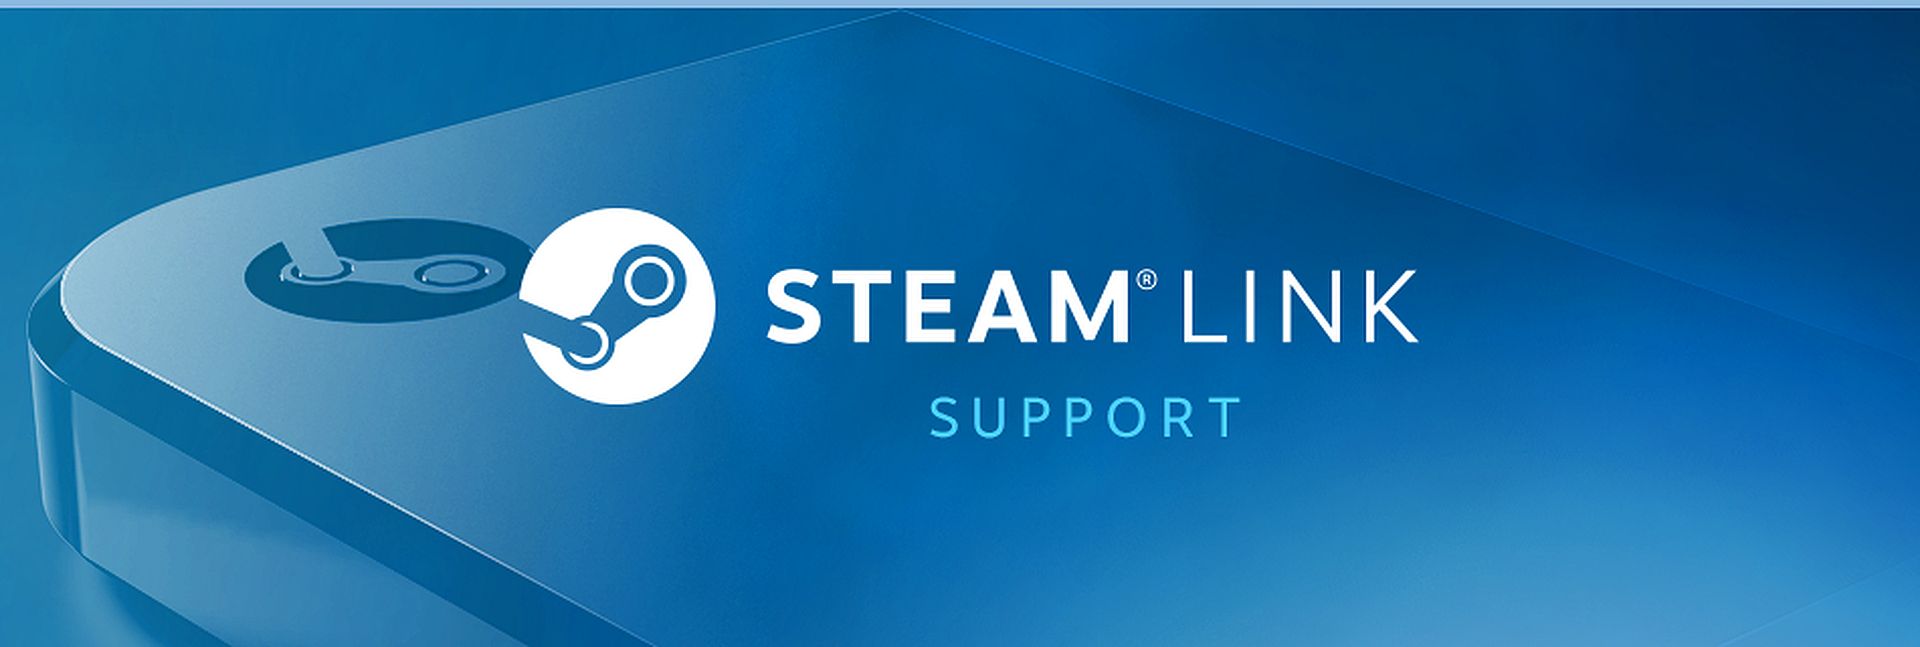 What is Steam Link and how does it work?